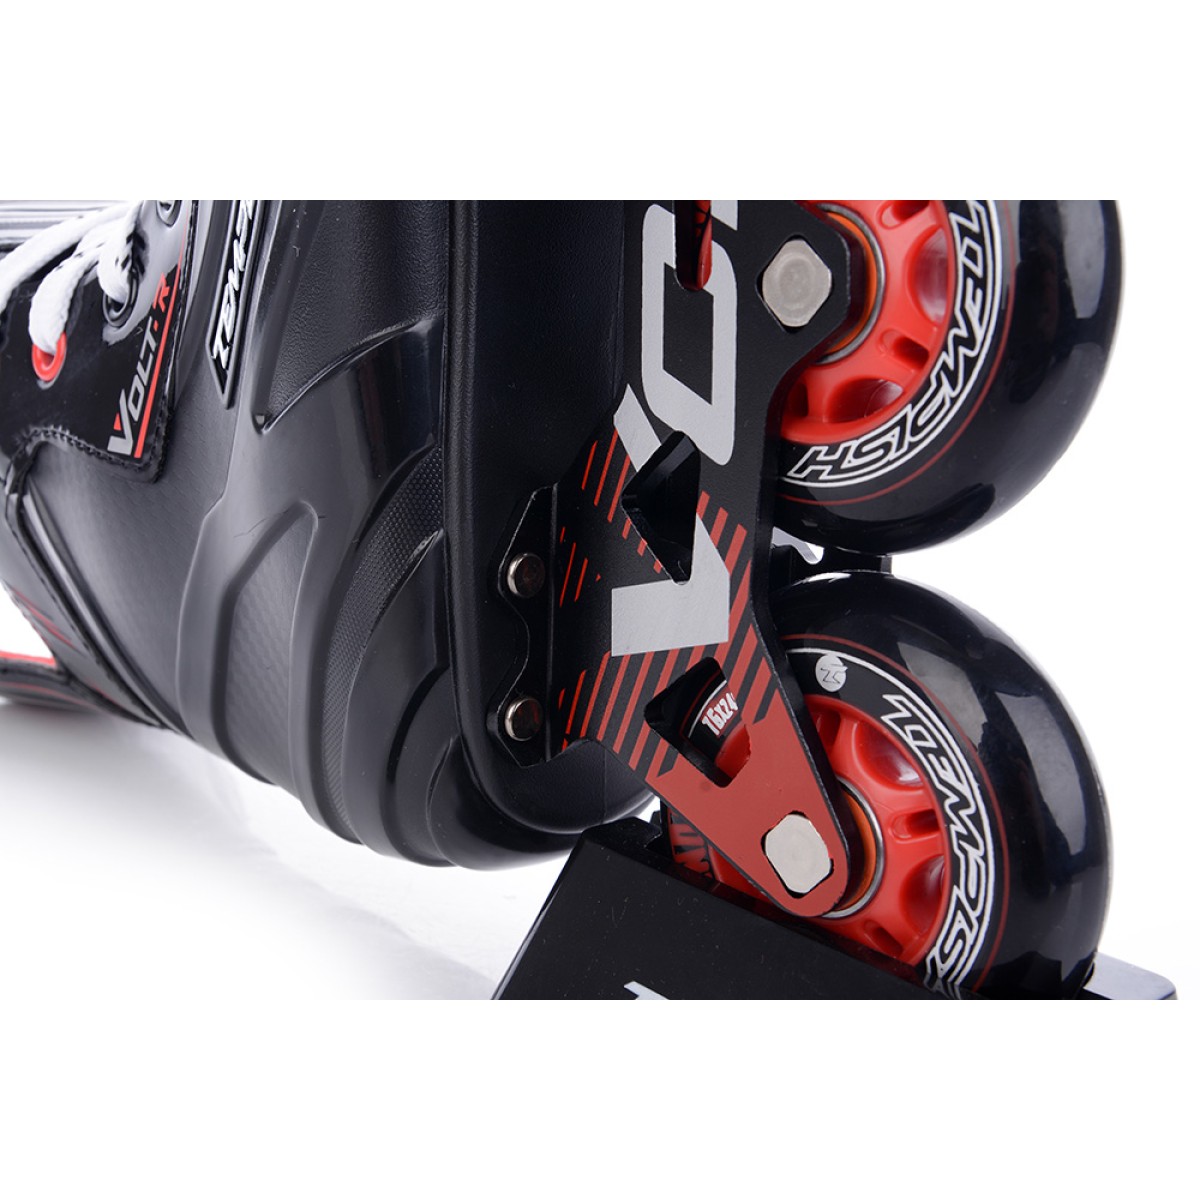 VOLT-R skates for IN-LINE hockey TEMPISH - view 26